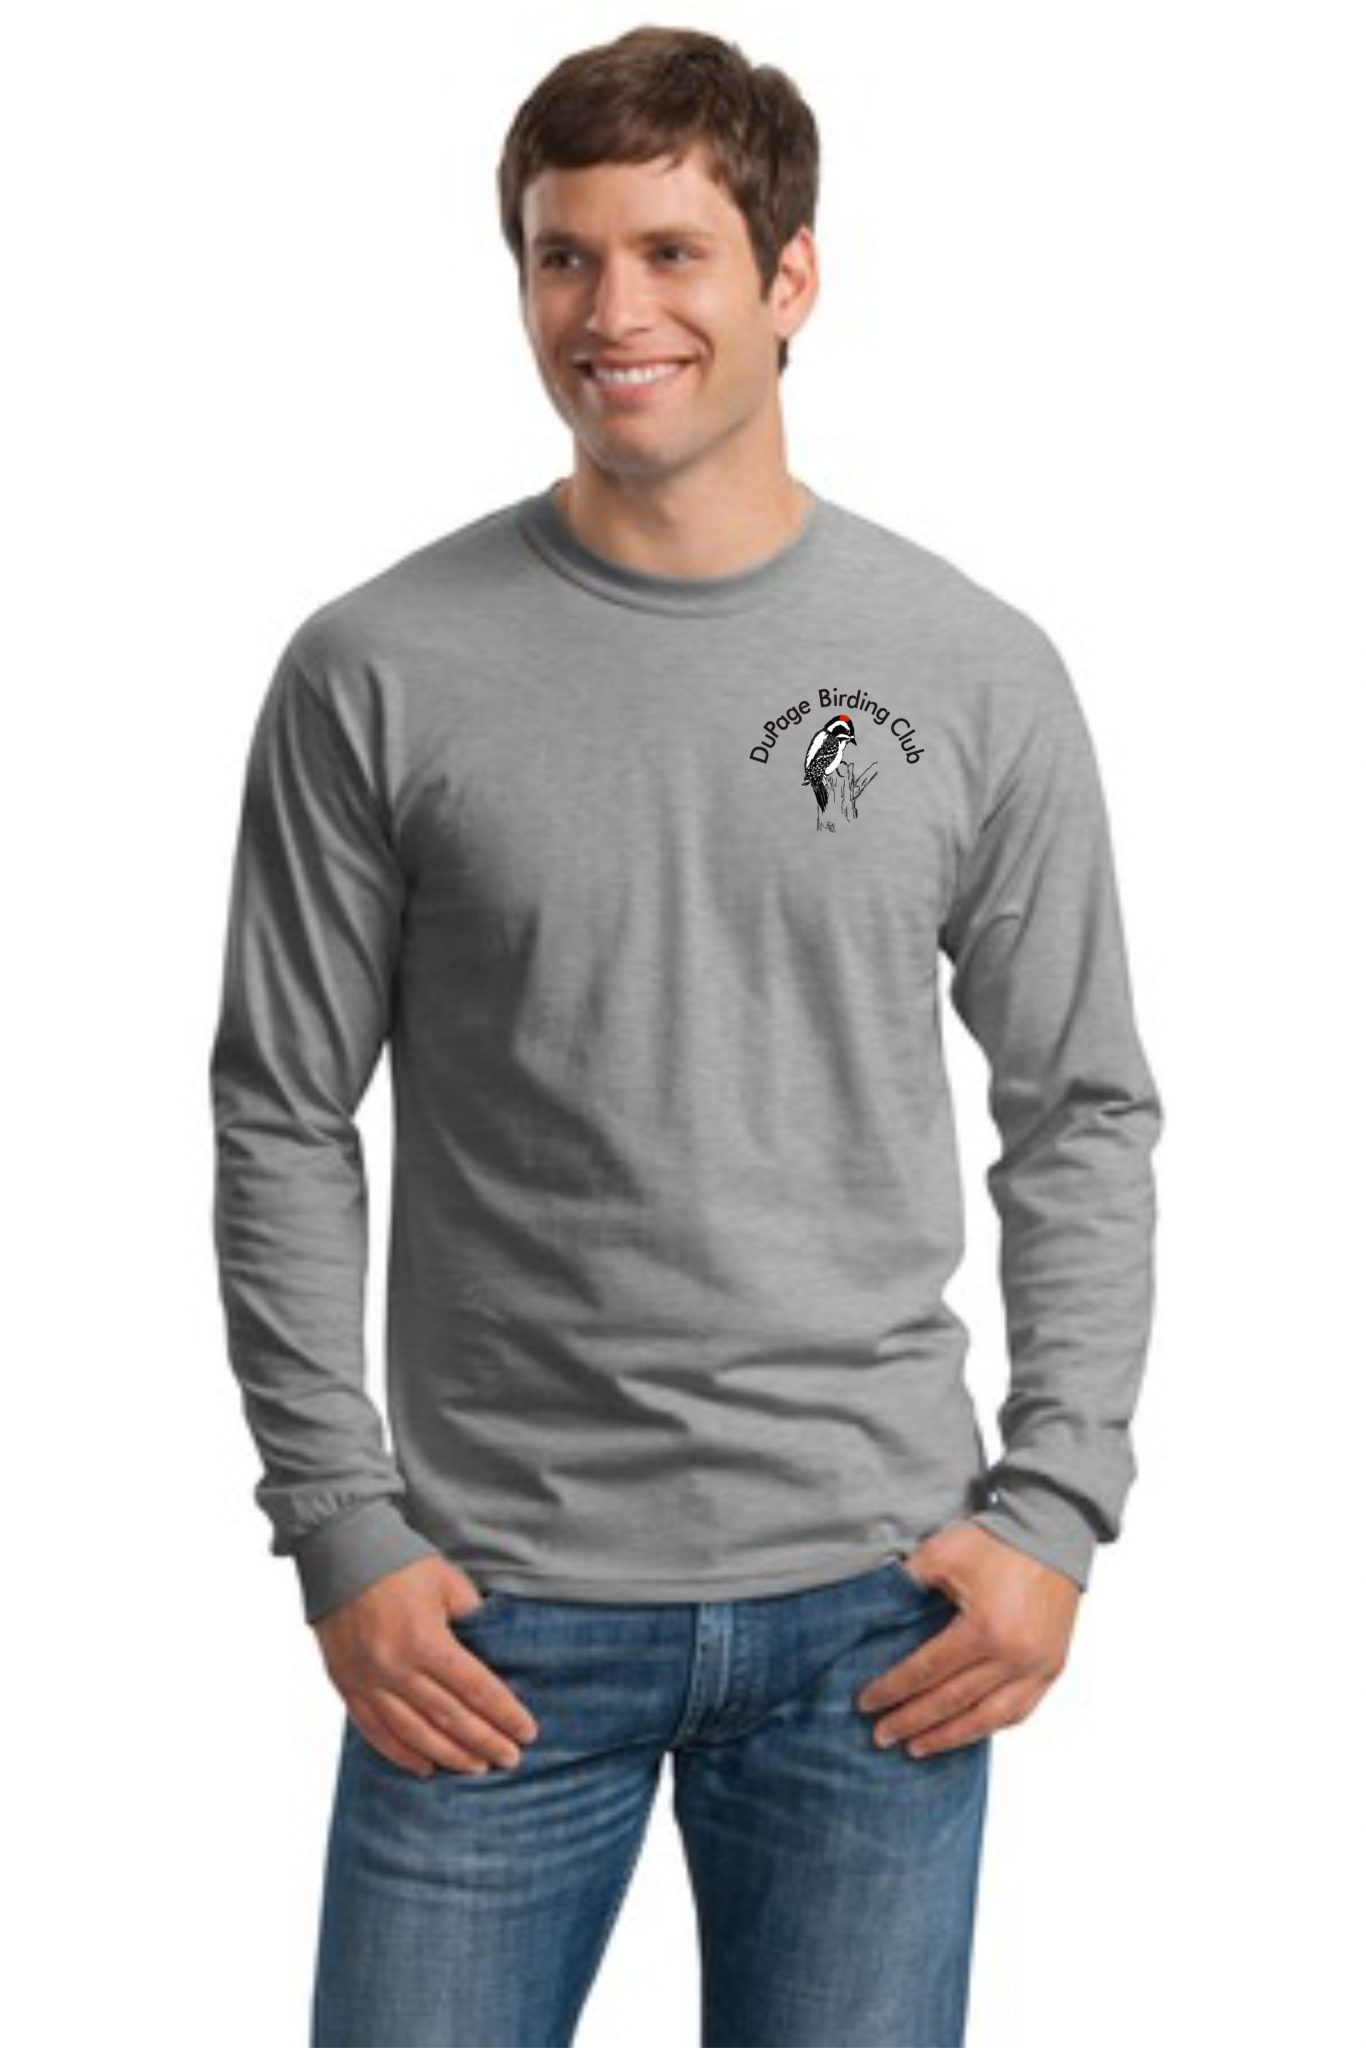 DuPage Birding Club Embroidered Long Sleeve T-Shirt | HyperStitch, Inc